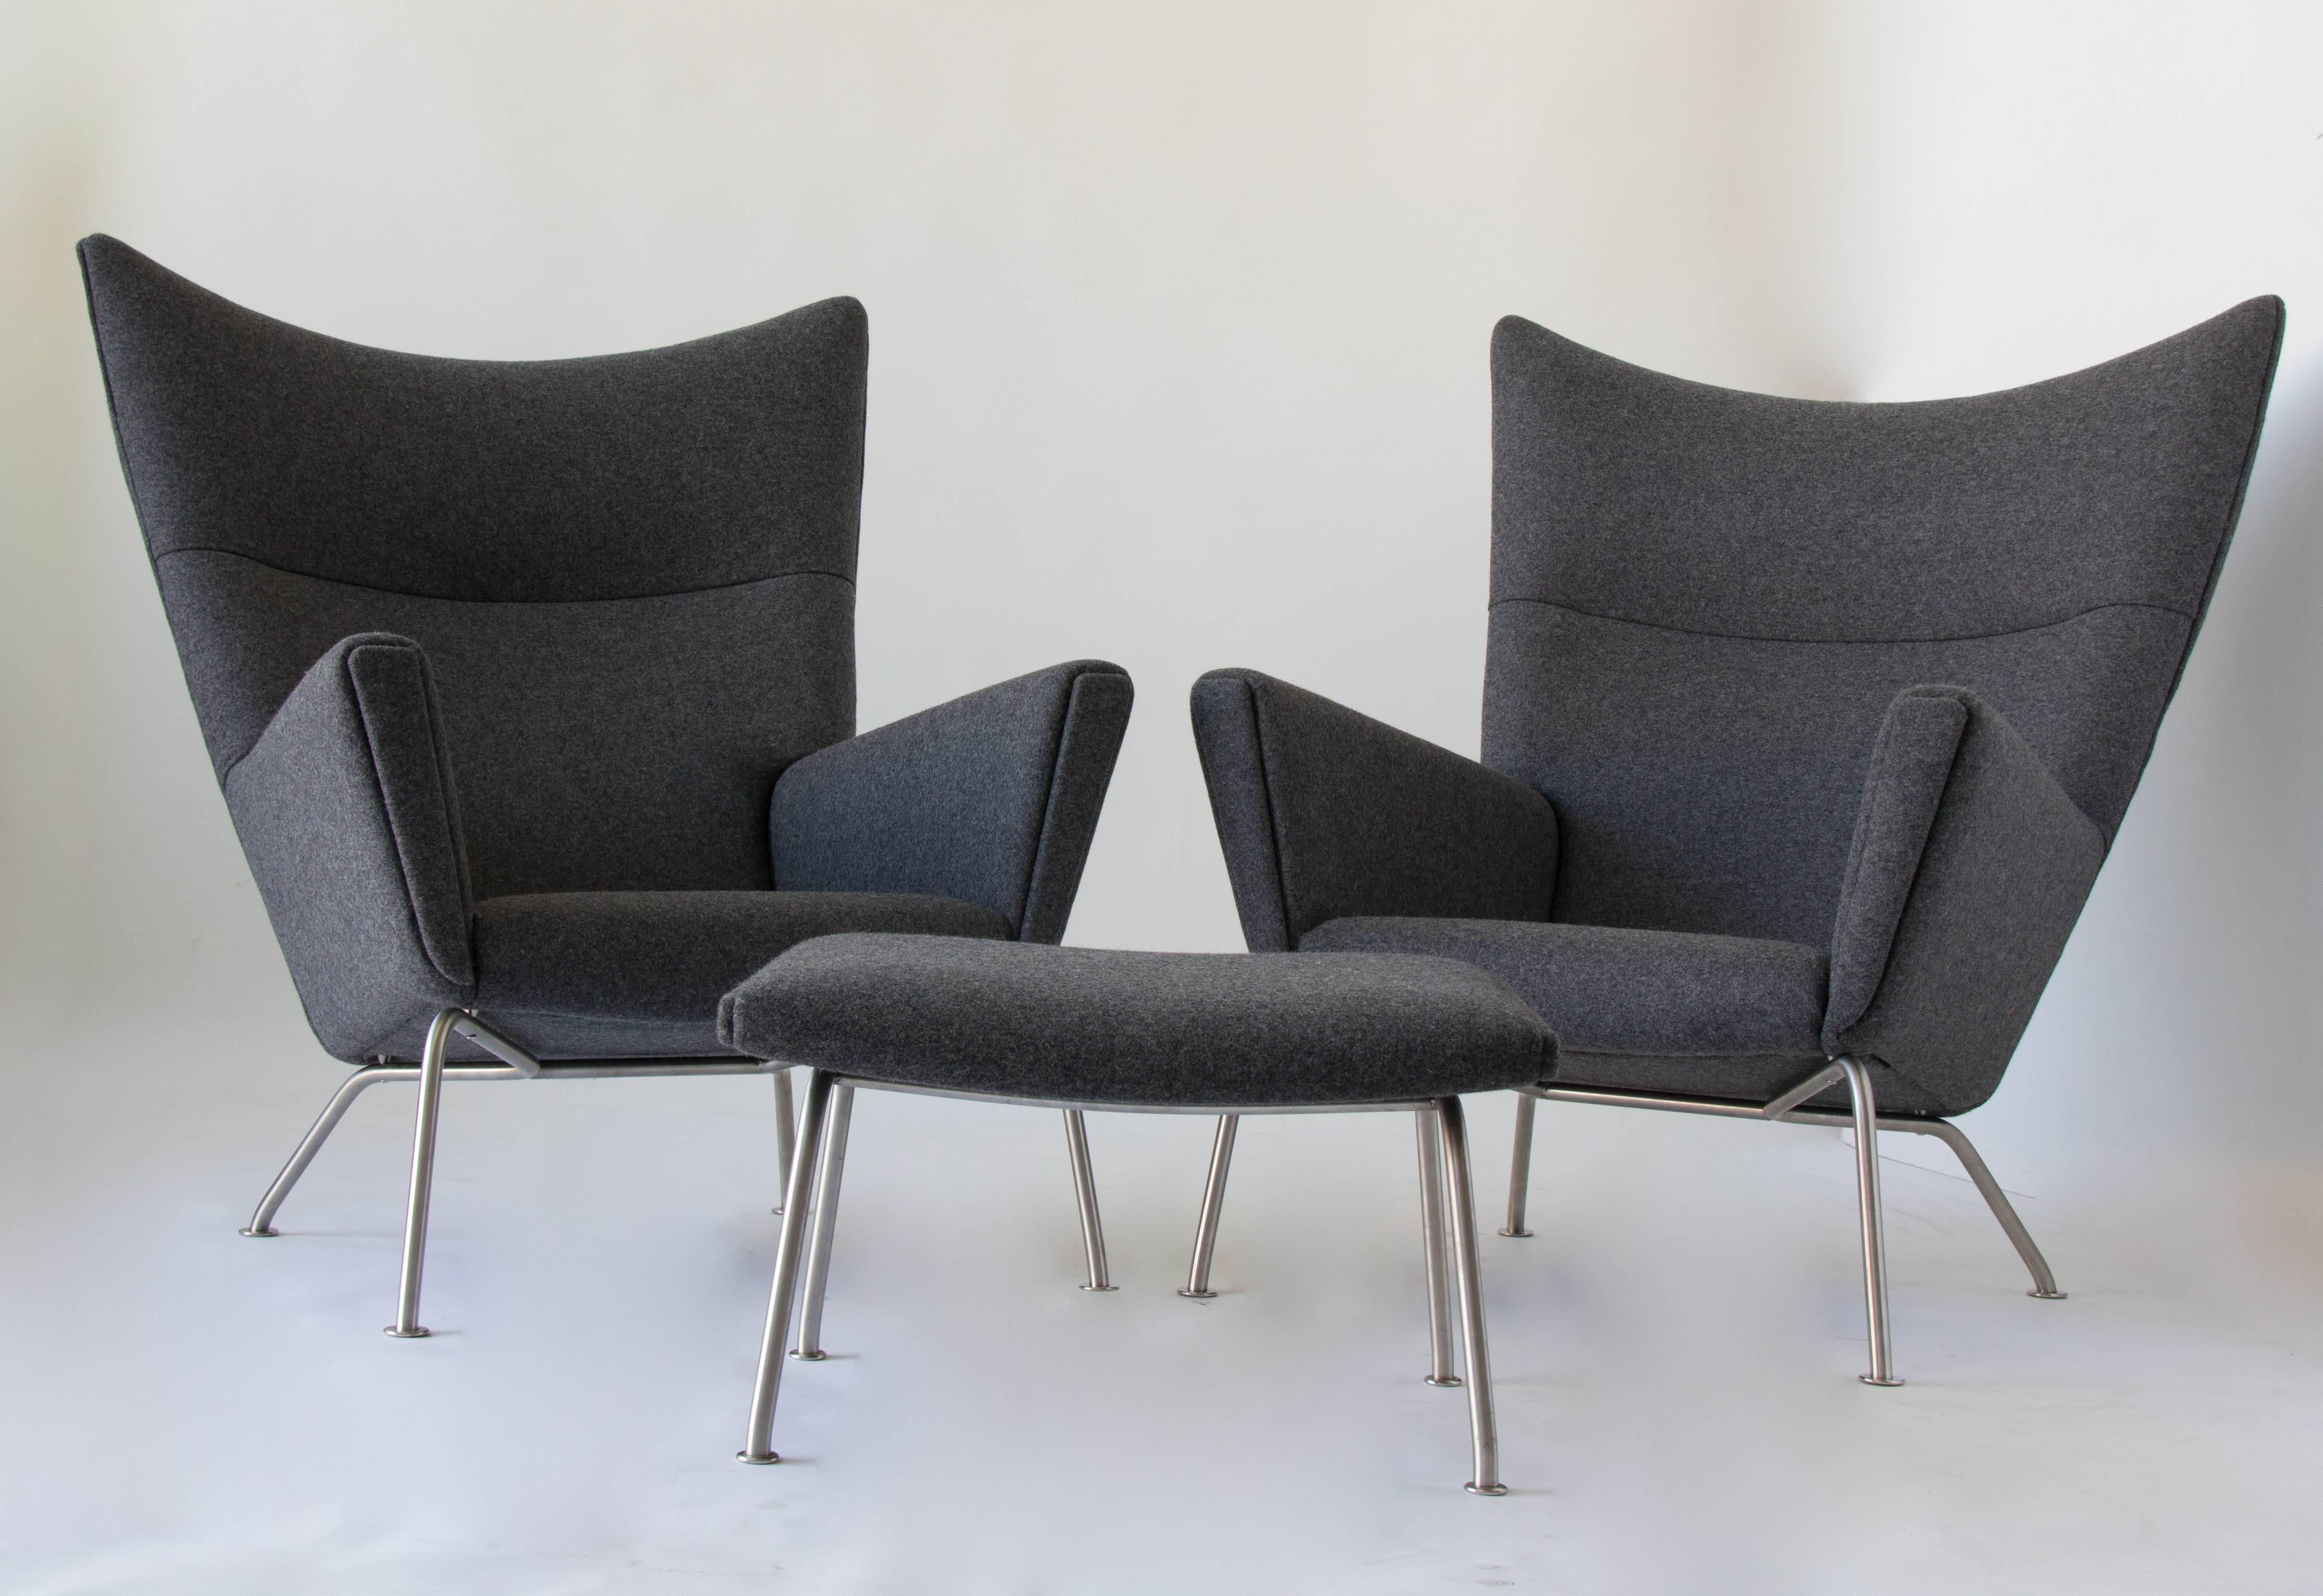 A pair of CH446 wingback chairs and with matching CH446 ottomans designed by Hans Wegner in 1960 and produced by Carl Hansen & Søn. The set has solid birch frames upholstered in a rich Maharam wool. Each piece sits on a base of brushed steel